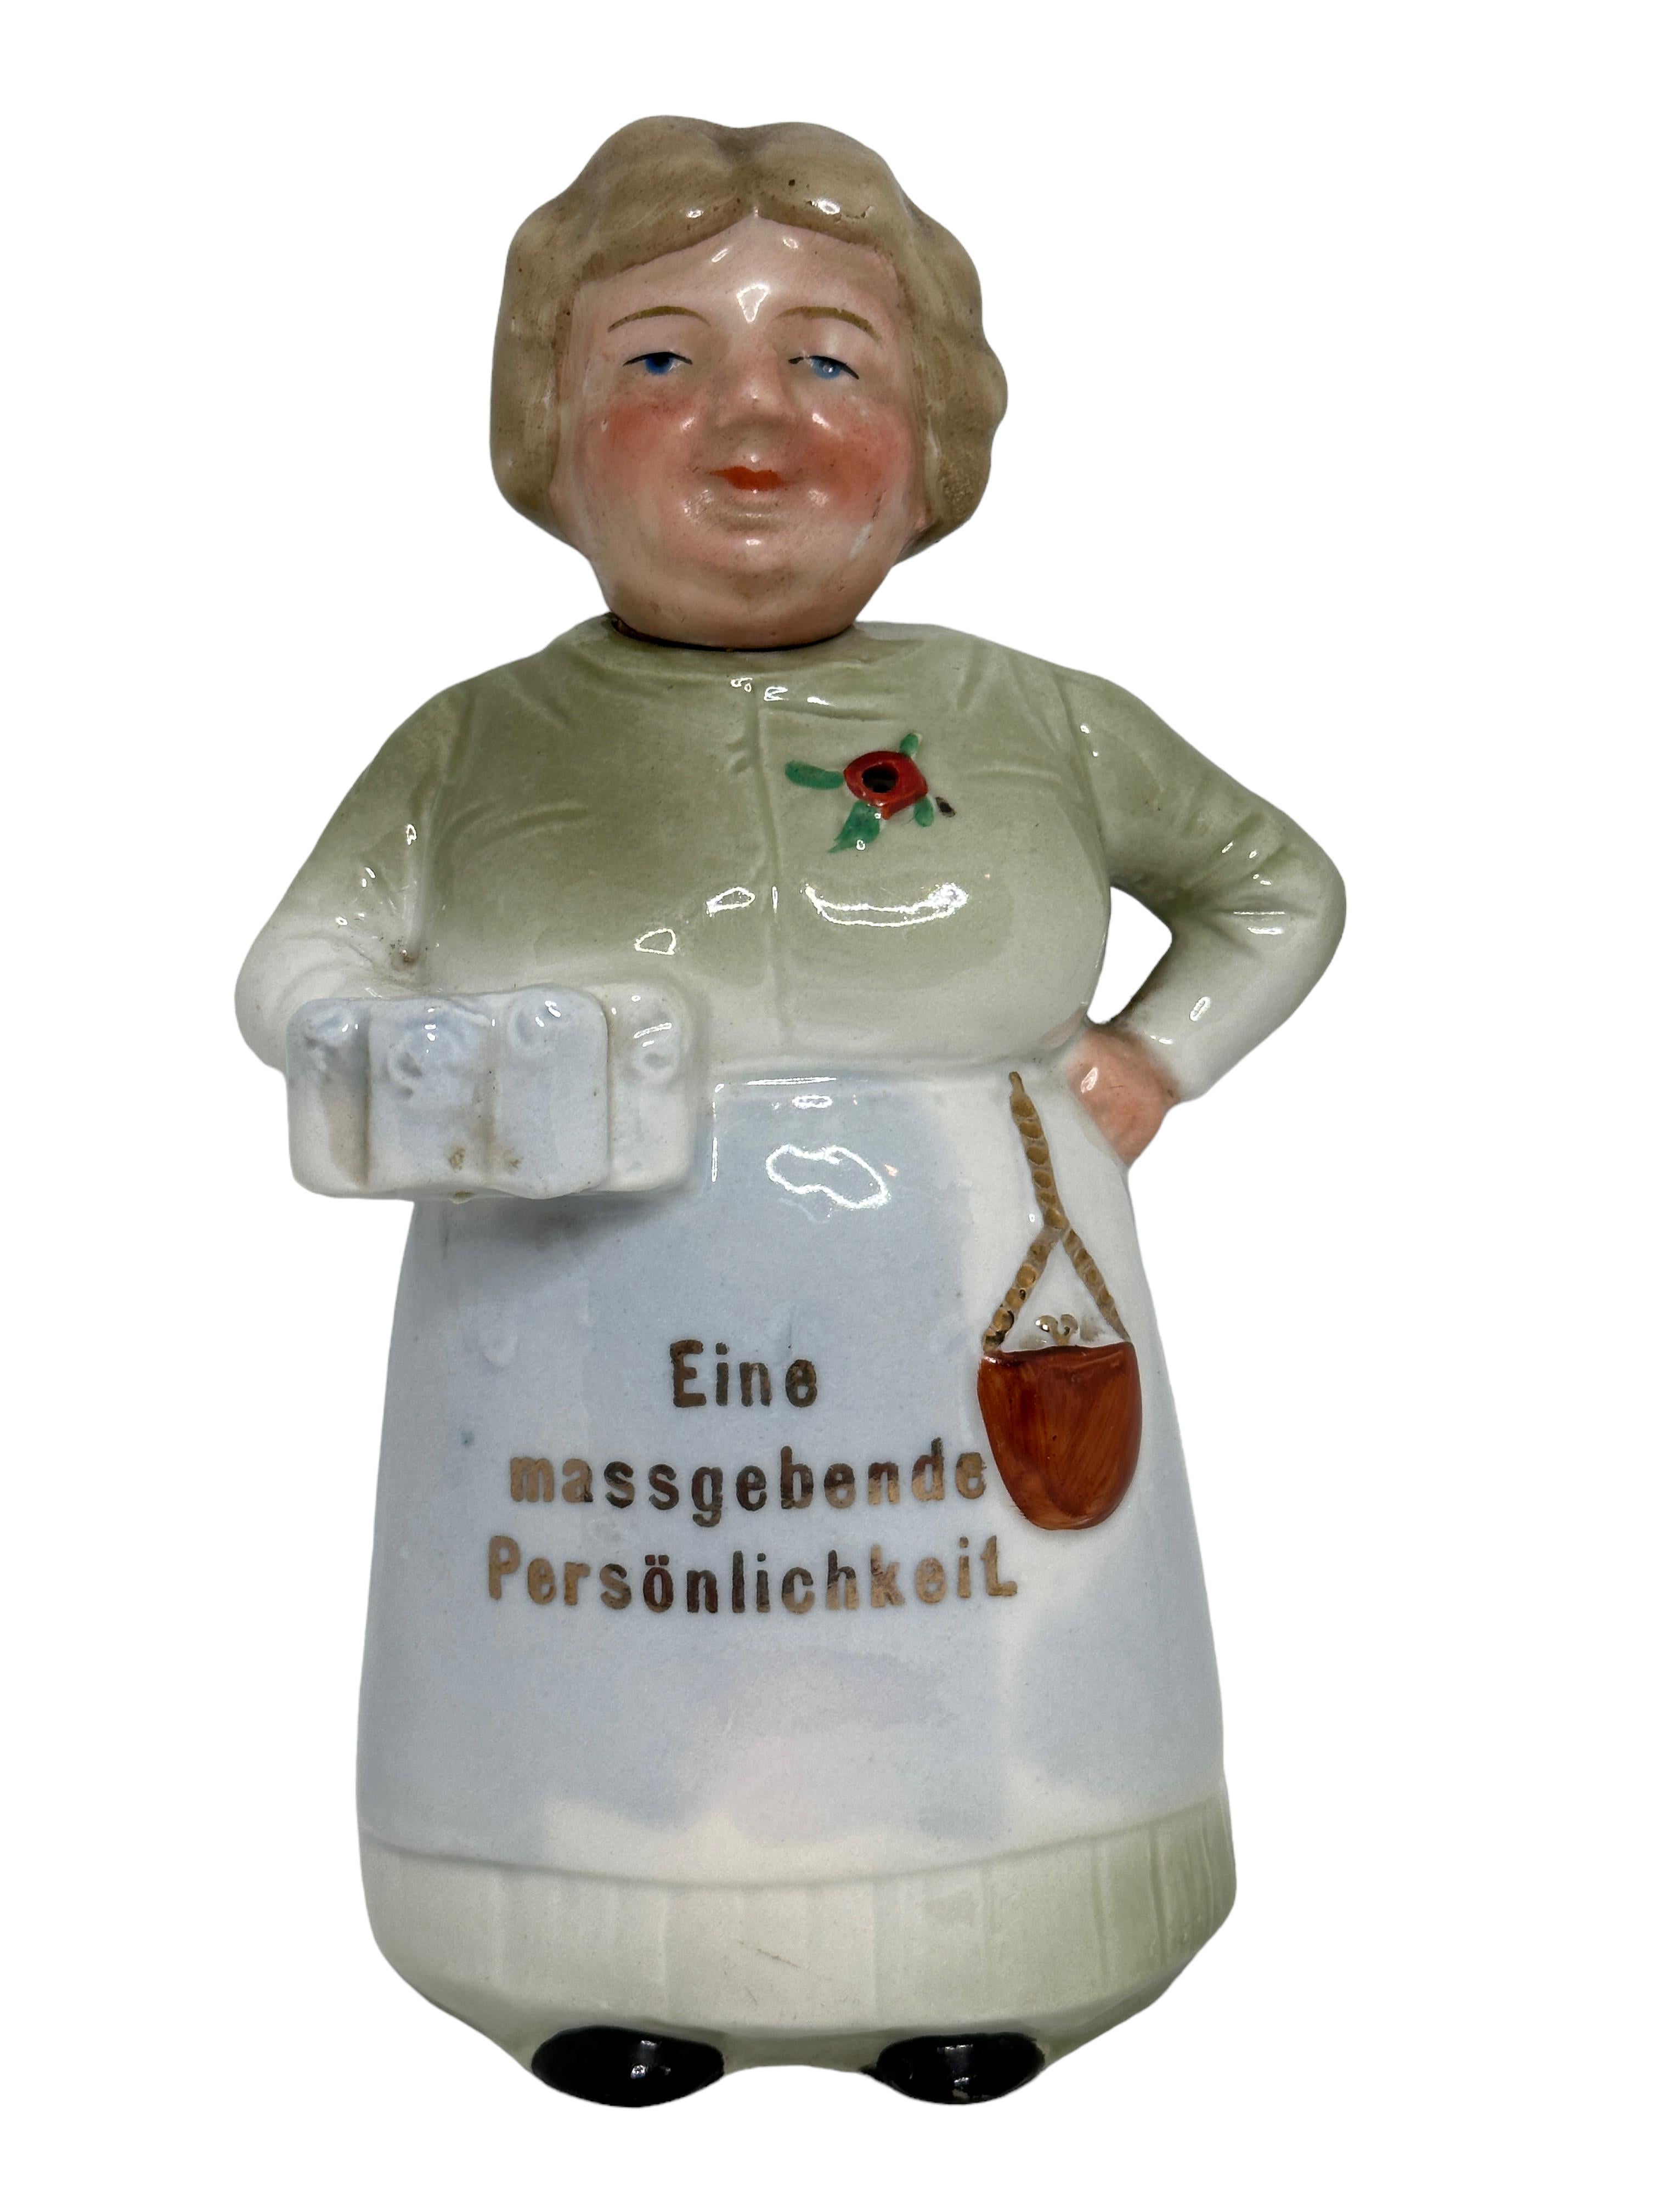 A gorgeous character bottle - traditional Bavarian waitress. This character bottle has been made in Germany circa 1930s or older, attributed to E. Bohne, Thuringia Germany. Absolutely gorgeous piece hand painted and still in great condition. Nice